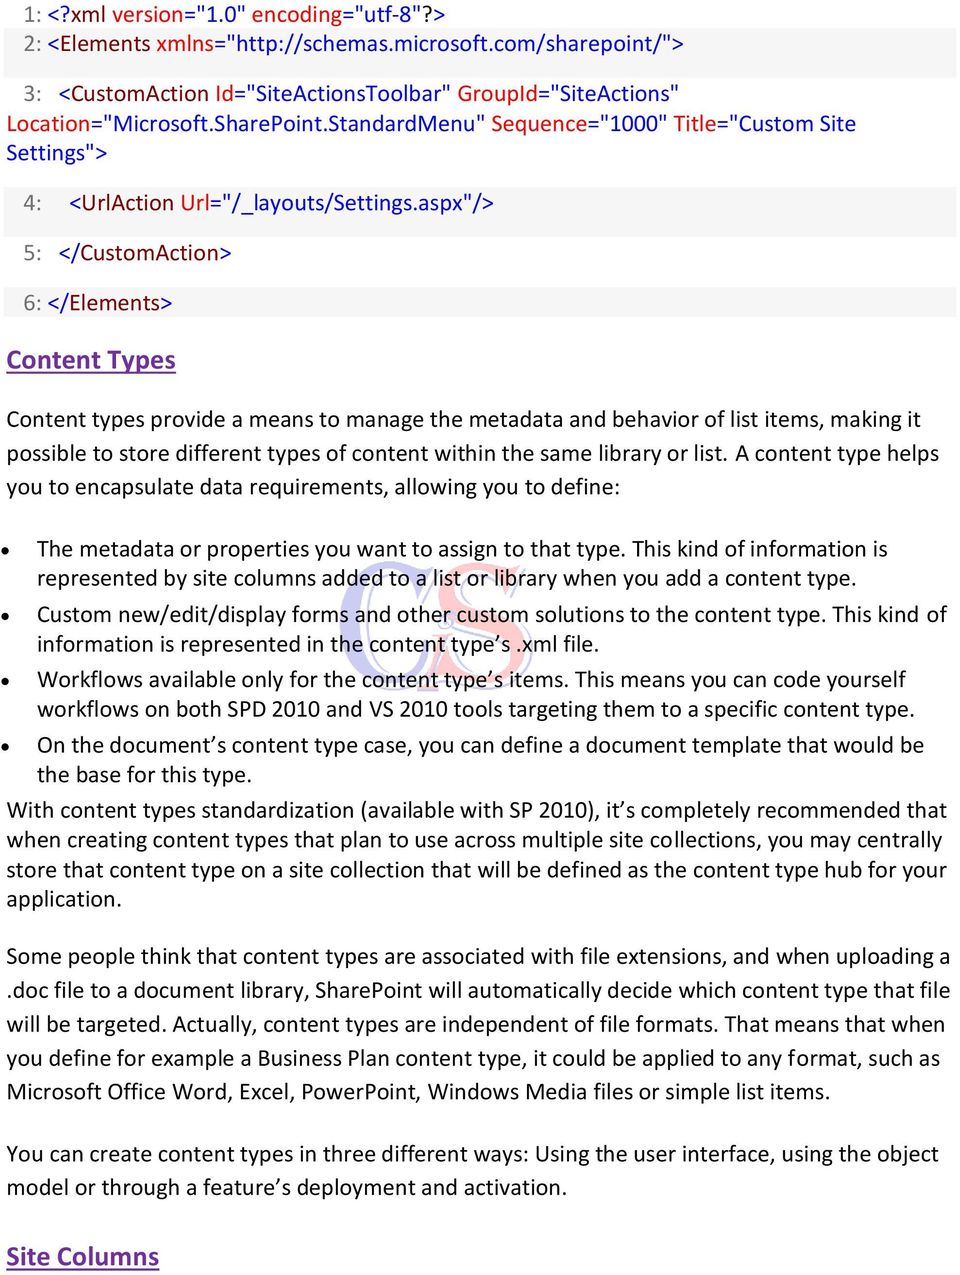 aspx"/> 5: </CustomAction> 6: </Elements> Content Types Content types provide a means to manage the metadata and behavior of list items, making it possible to store different types of content within